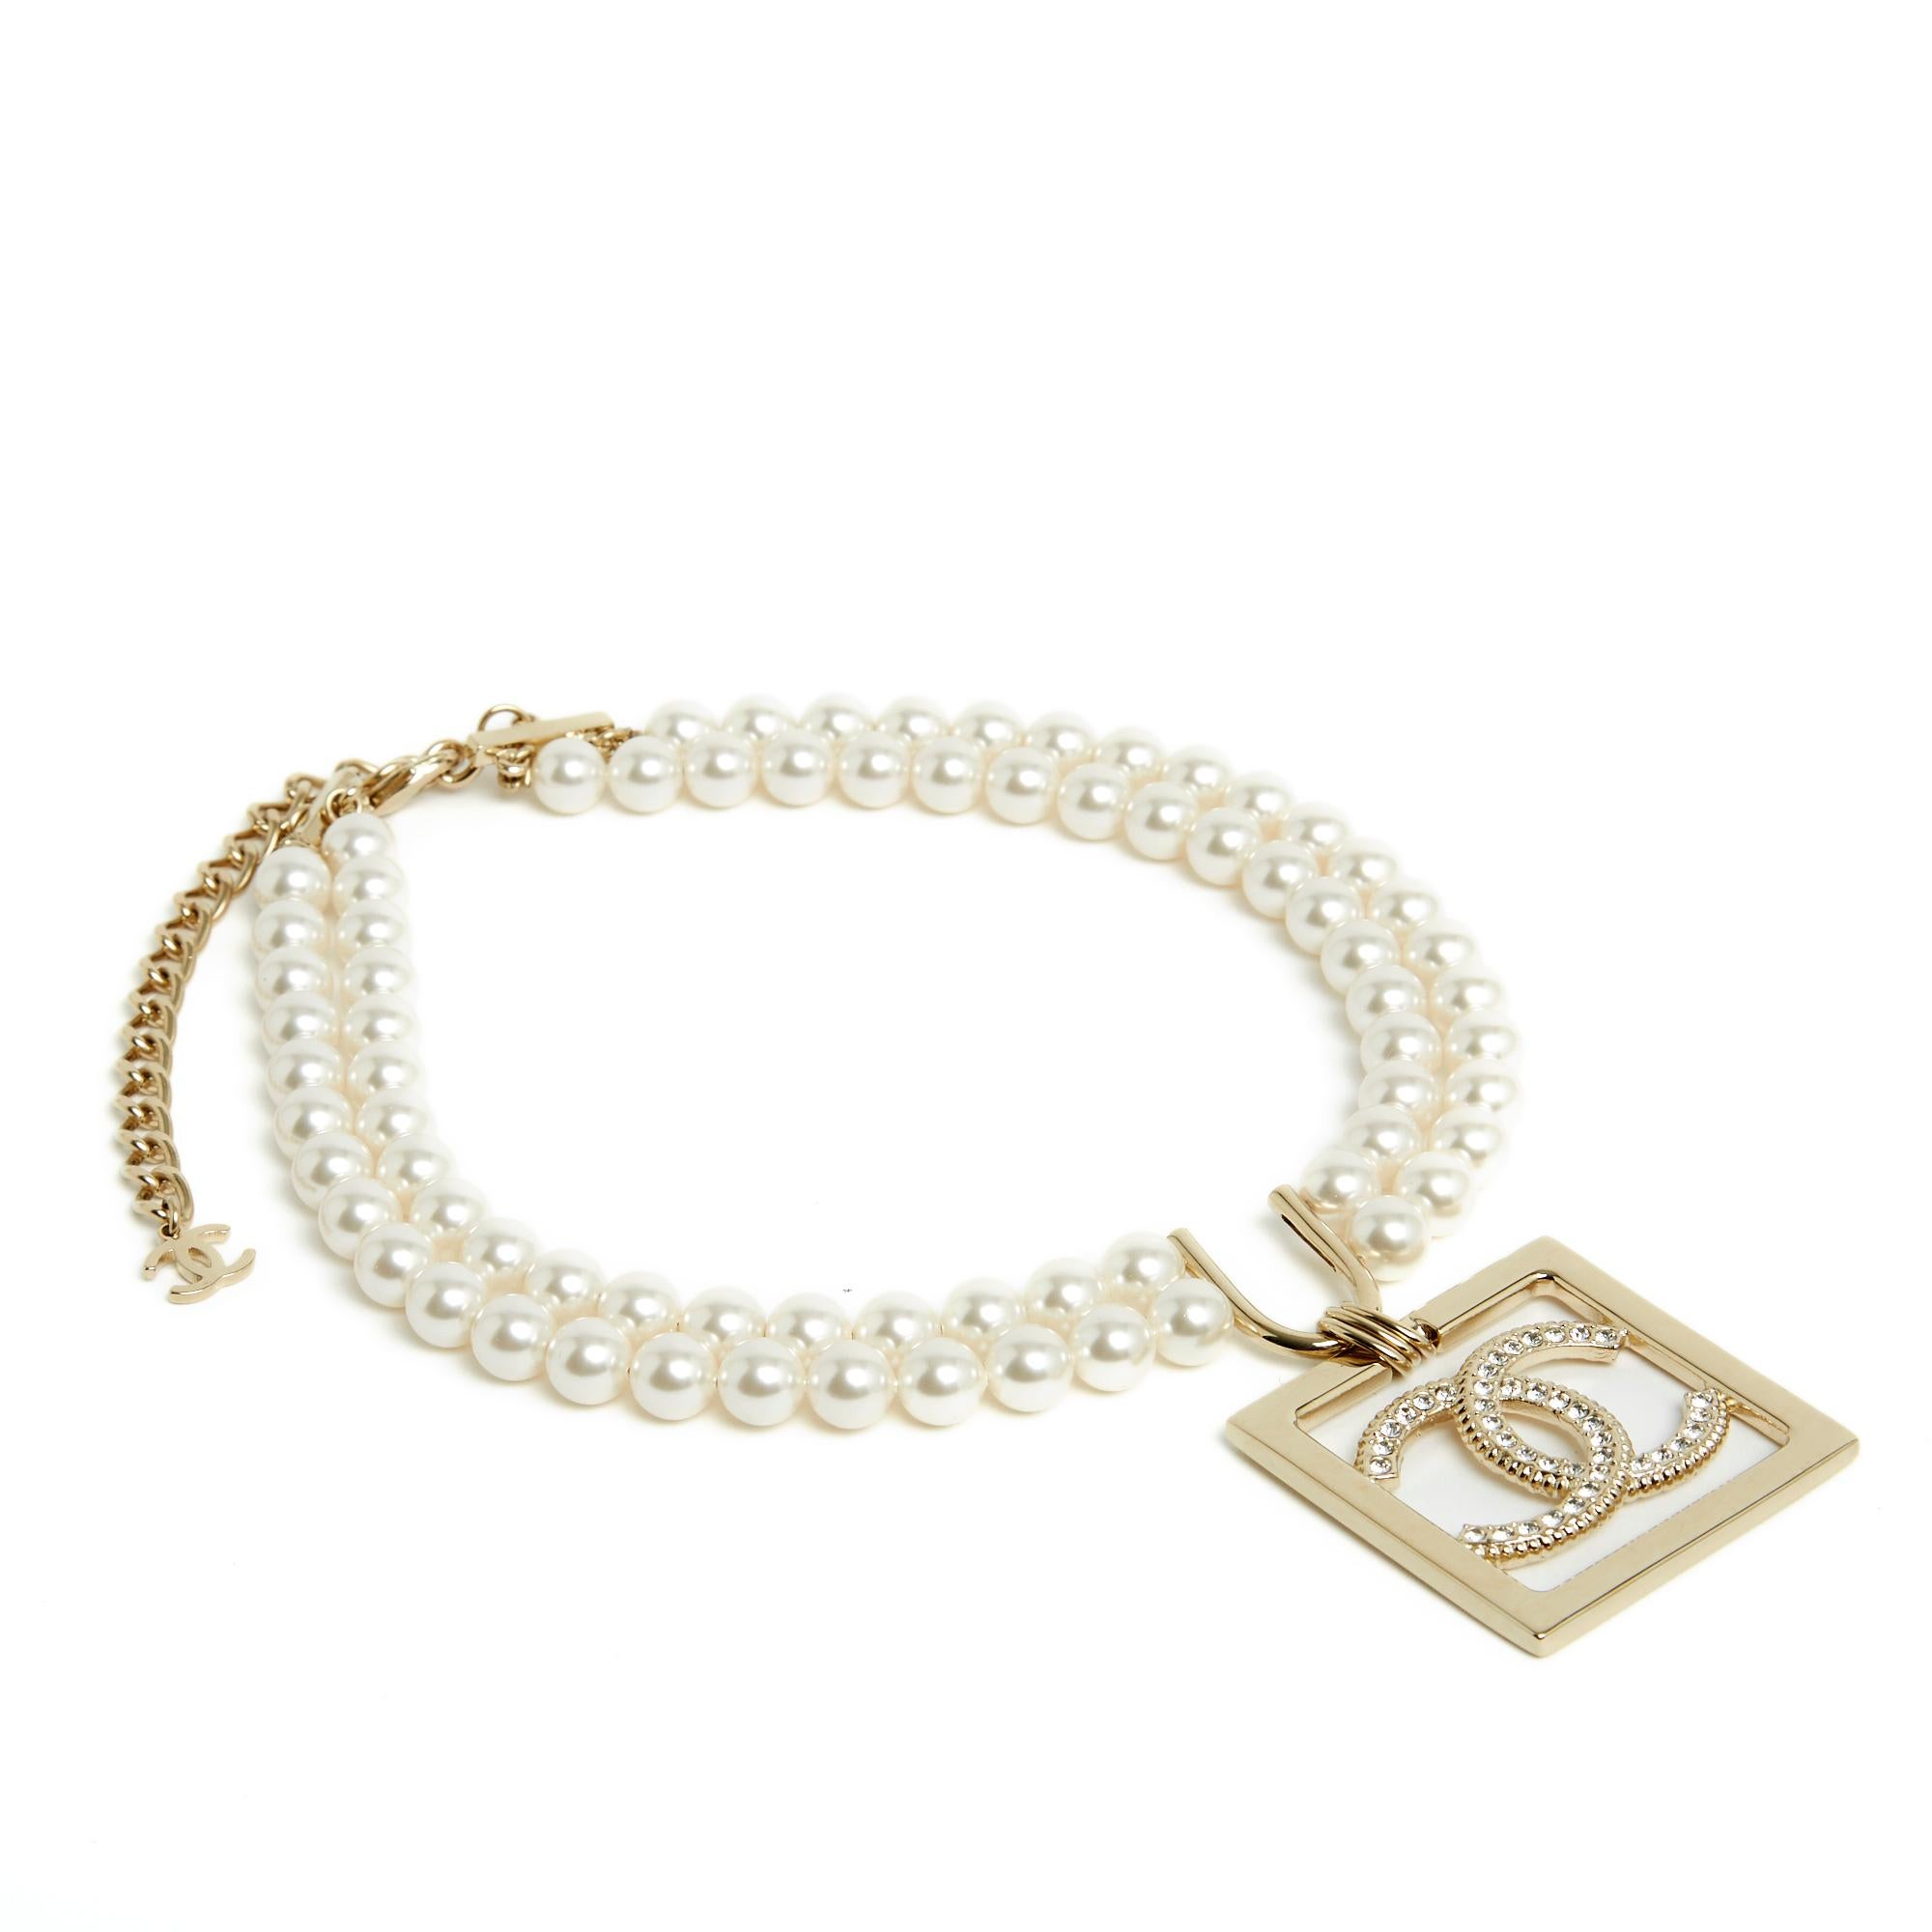 Chanel set, SS2023 collection, composed of a choker necklace with 2 rows of white fancy pearl, central motif in gold metal with square pendant decorated with a CC logo inlaid with white rhinestones, fastening with a carabiner on a gold metal chain